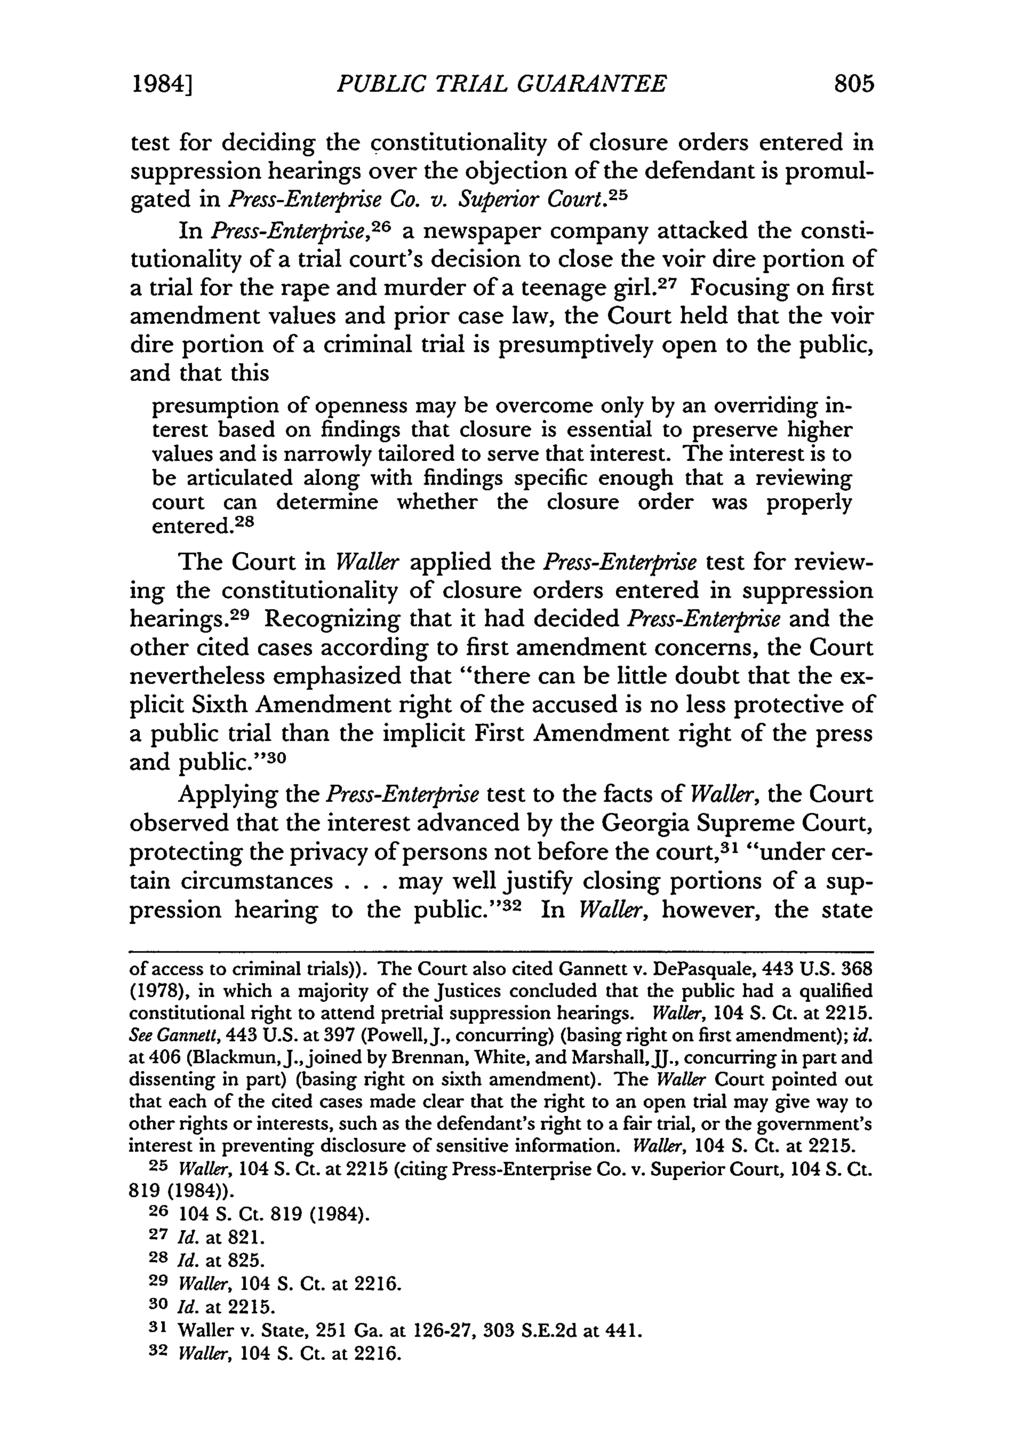 1984] PUBLIC TRIAL GUARANTEE 805 test for deciding the constitutionality of closure orders entered in suppression hearings over the objection of the defendant is promulgated in Press-Enterprise Co. v.